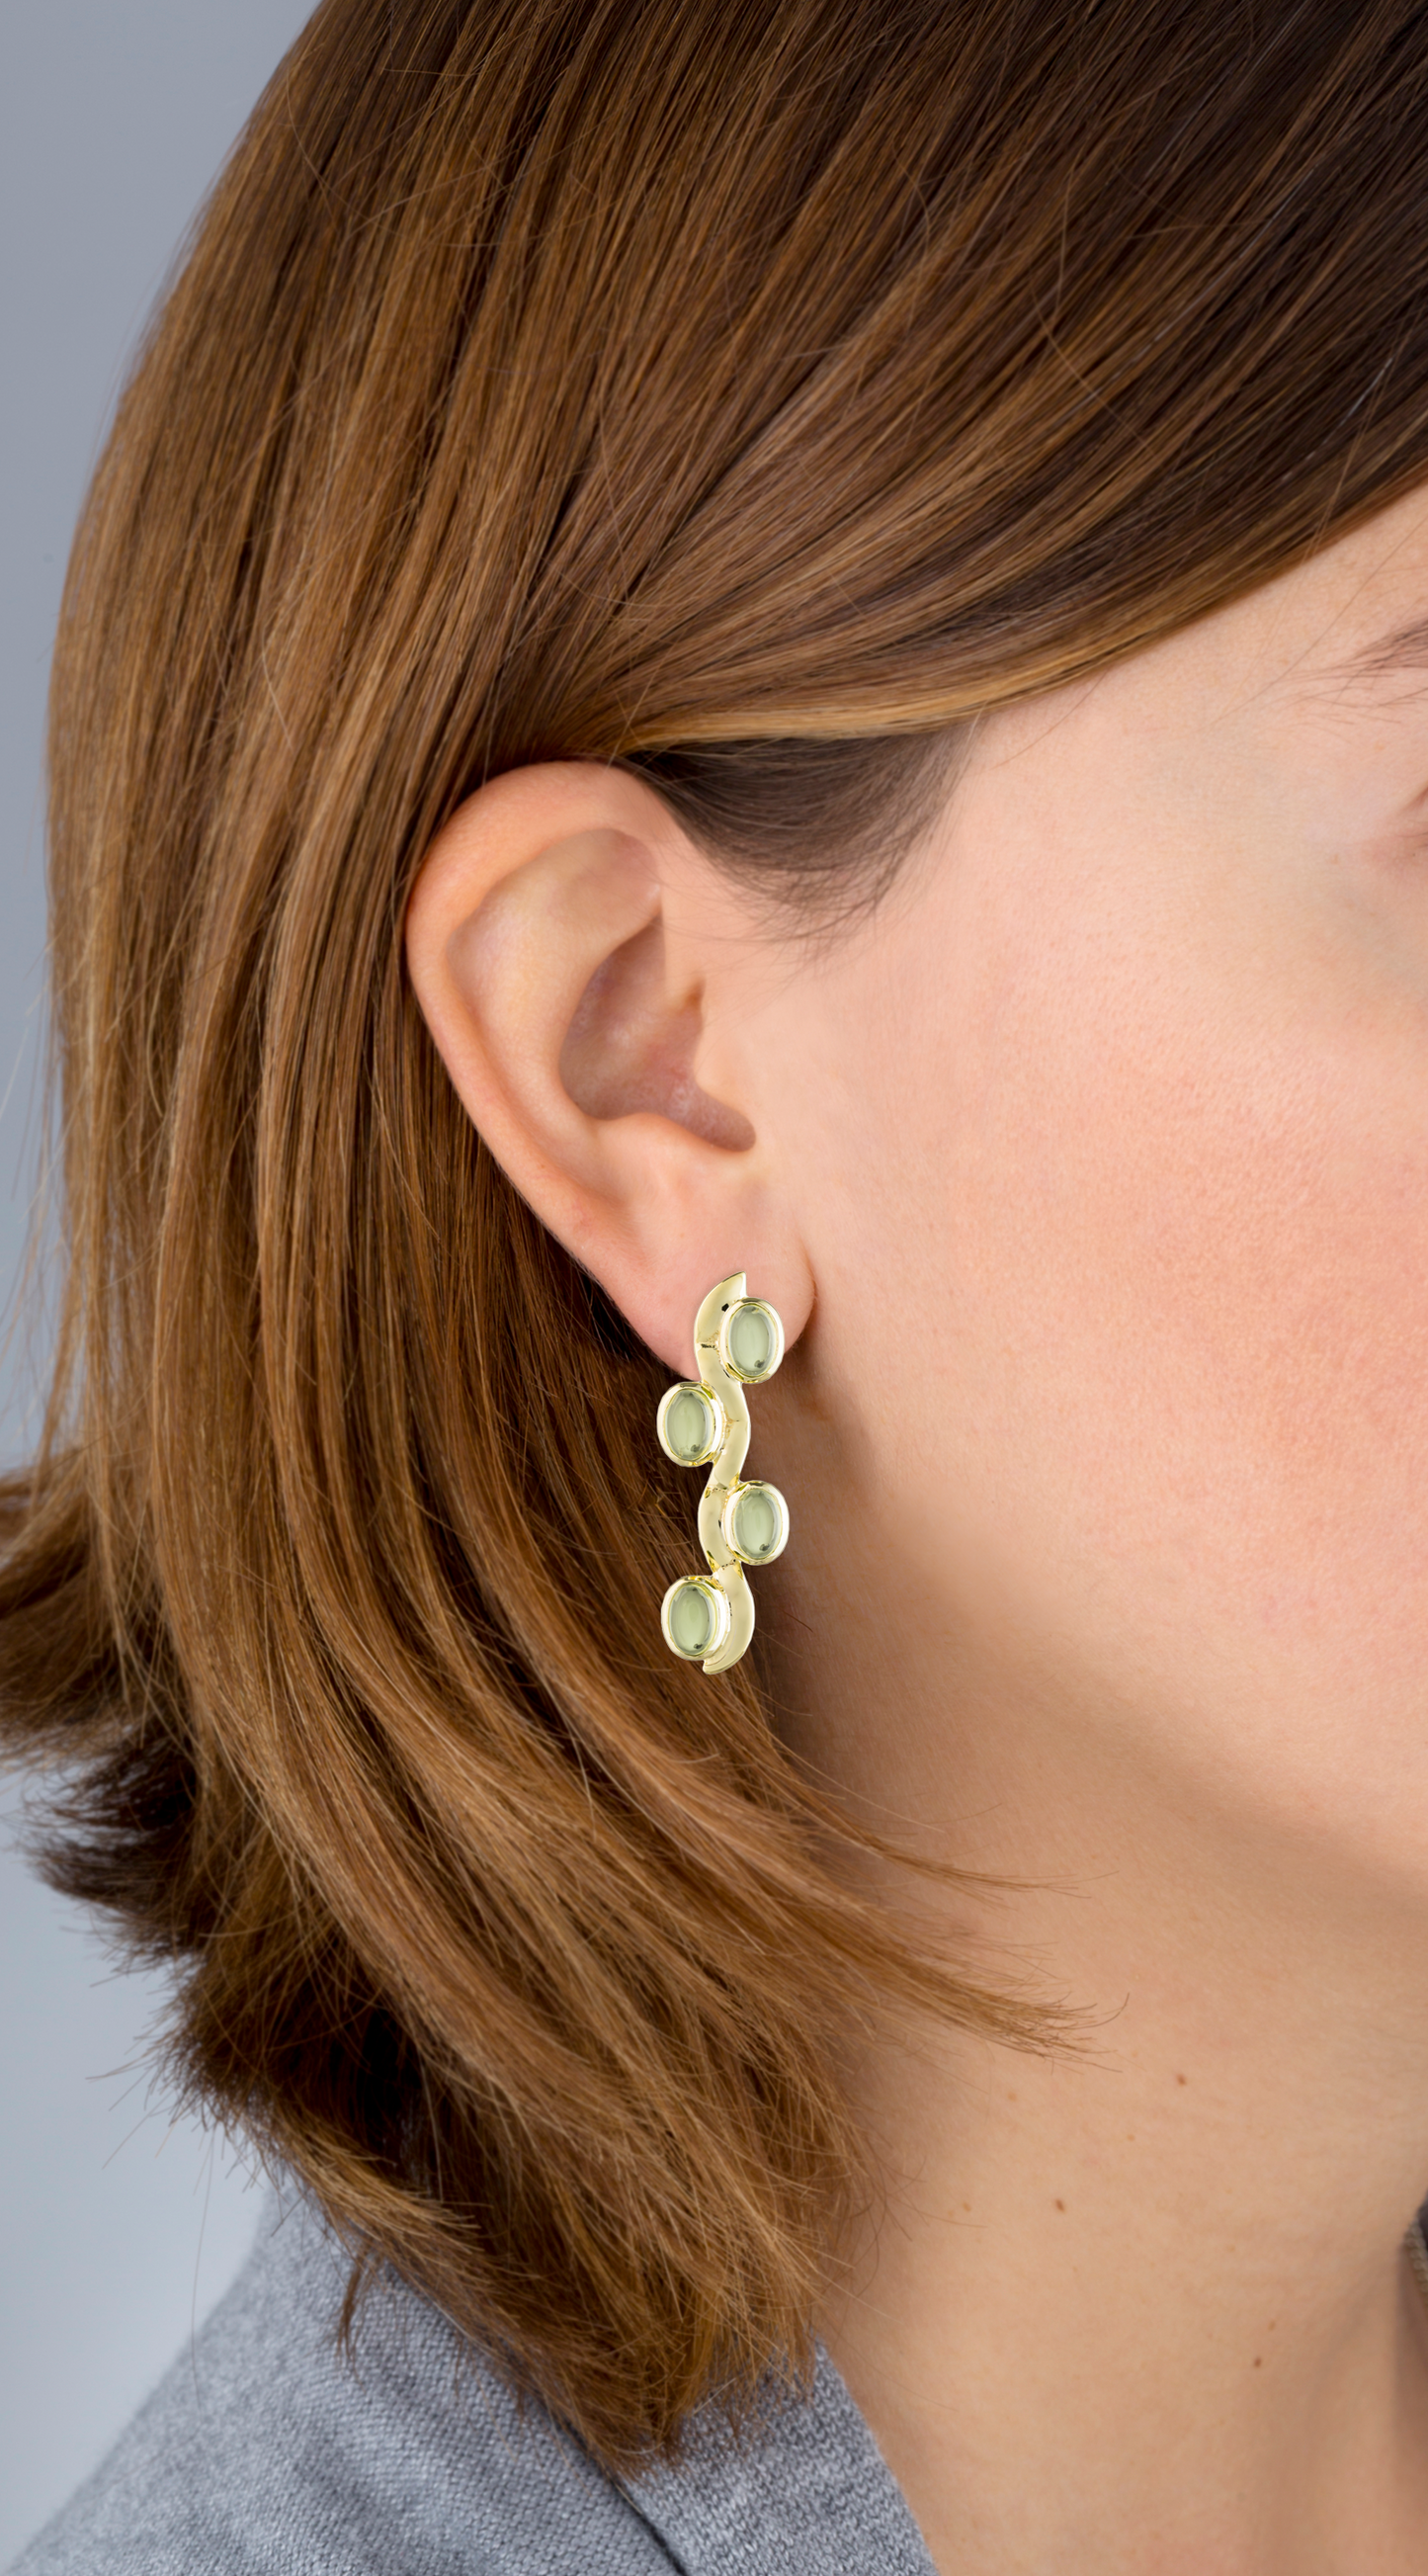 Caramelo 925 Silver Earrings plated in 18k Yellow Gold with Peridot Cabouchon.